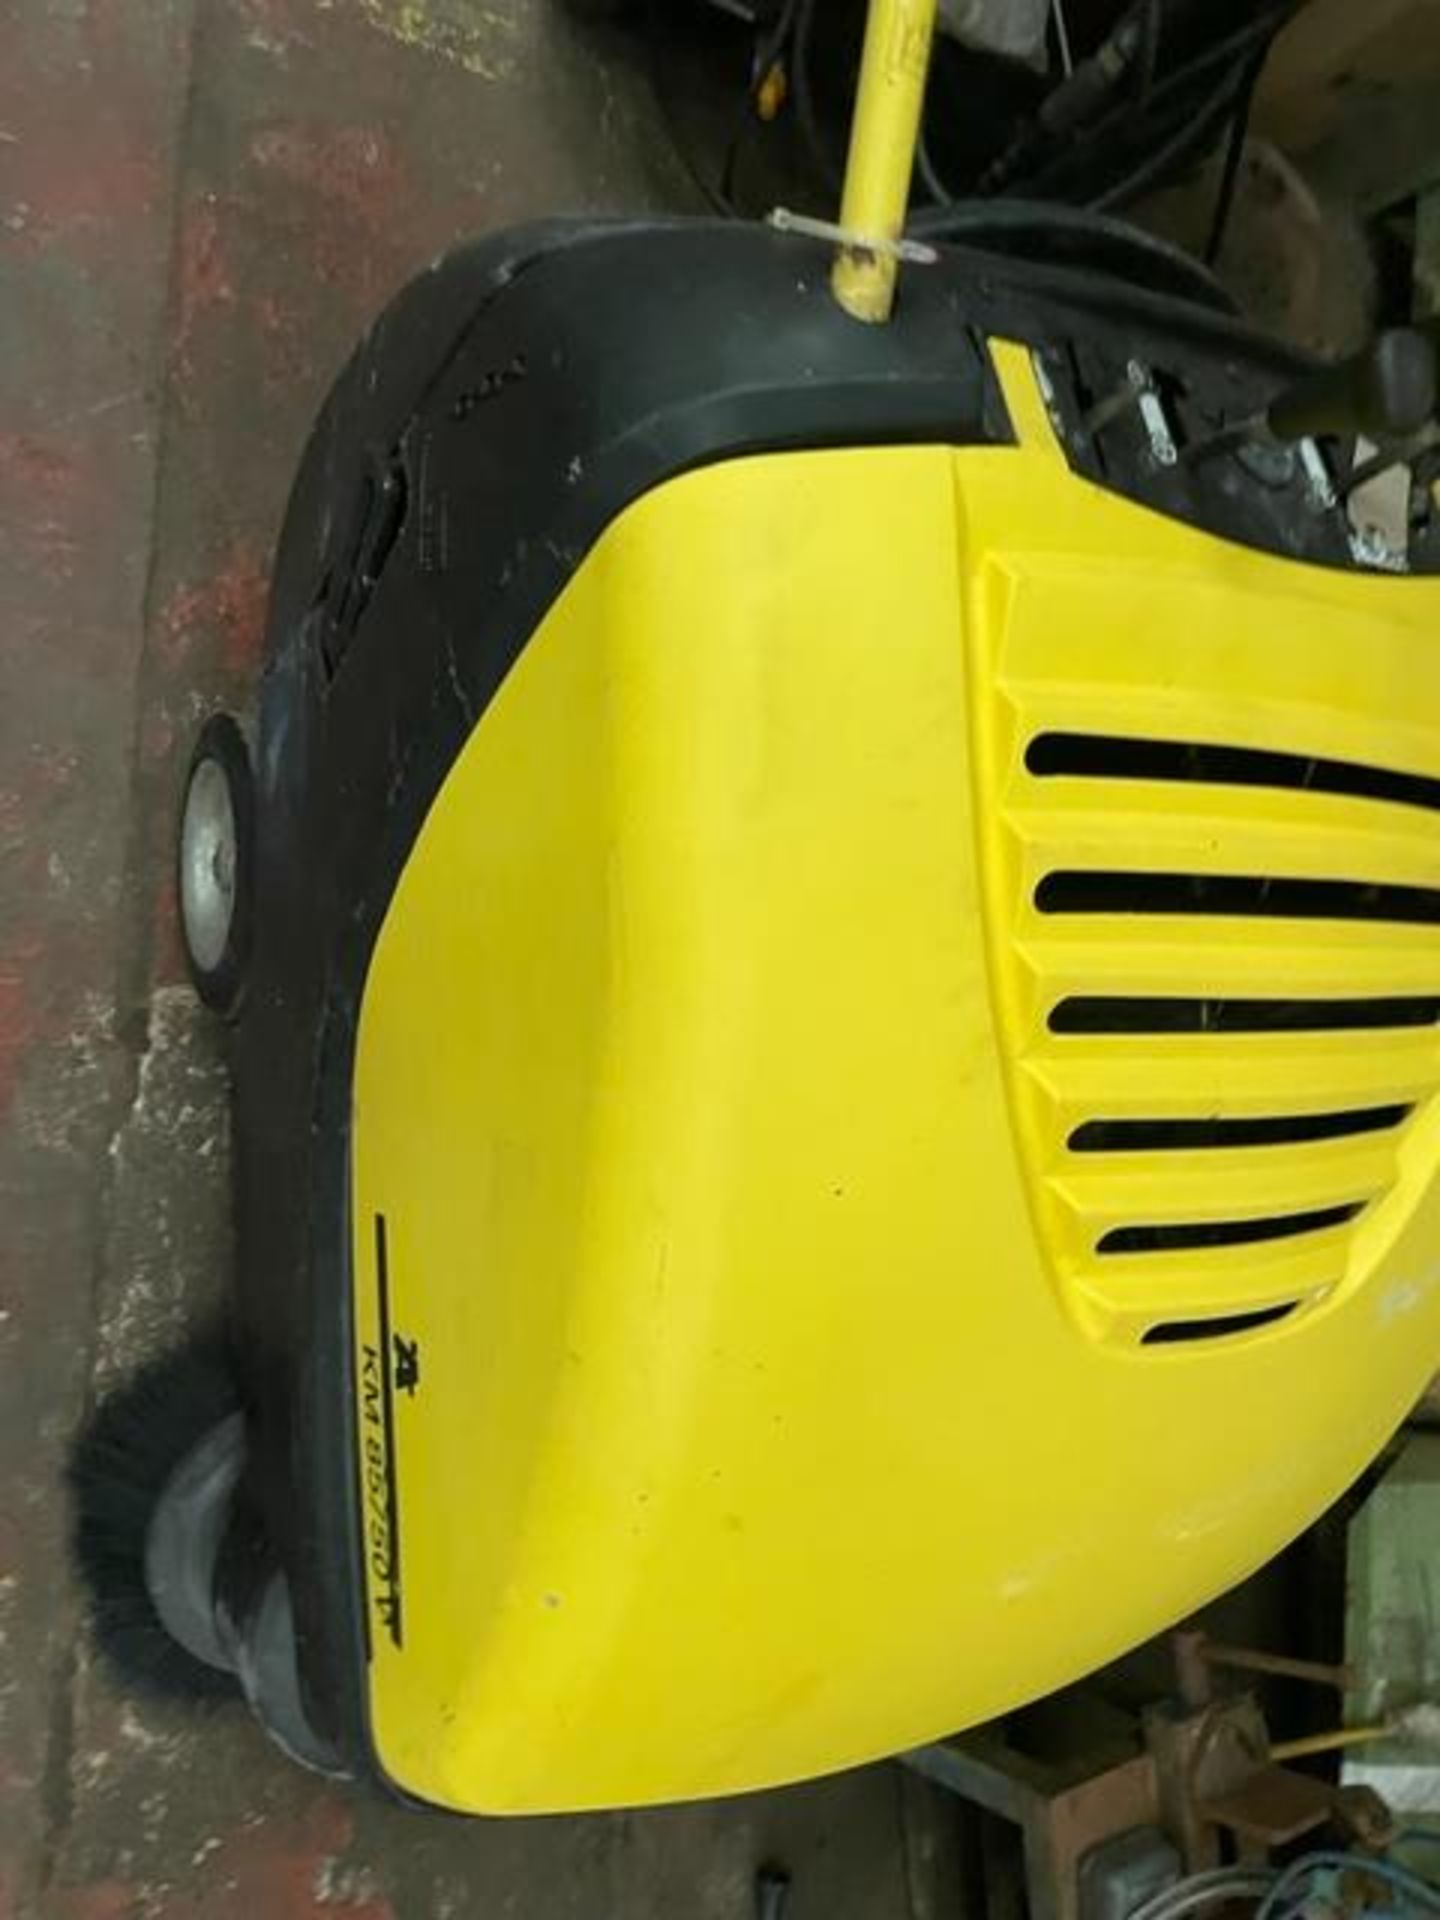 Looking tidy a karcher floor sweeper has a gx 160 engine on it  quite a bulky thing - Image 3 of 5